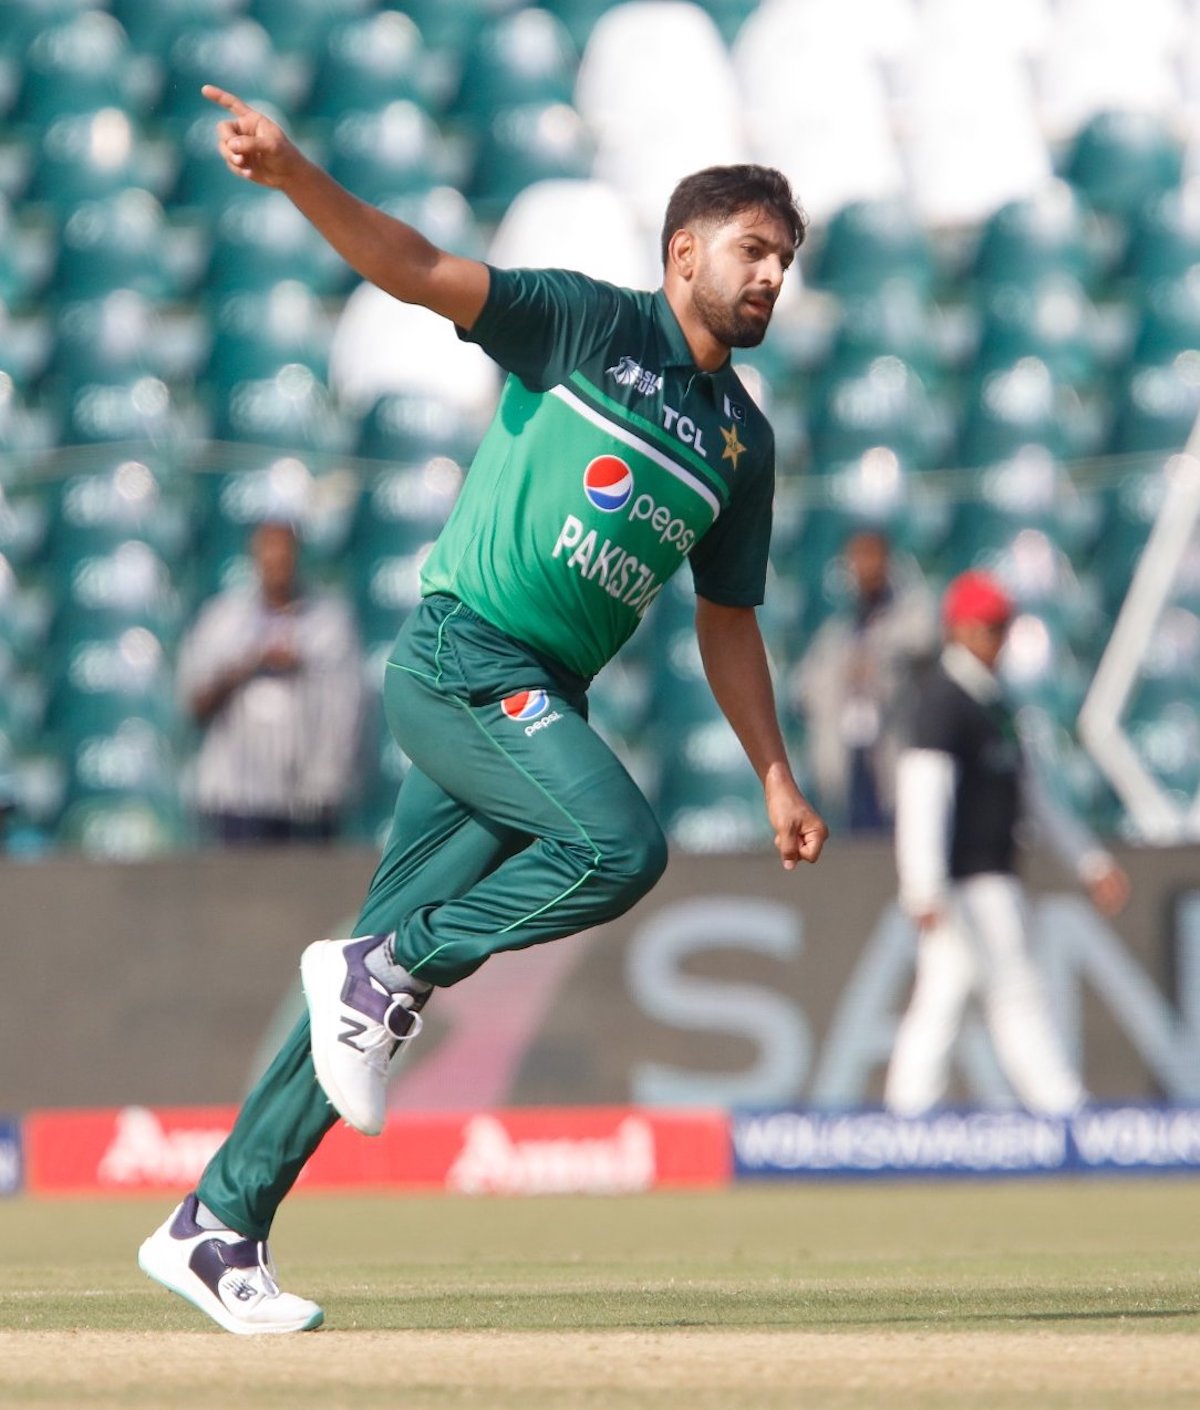 PCB's statement comes after white-ball specialist Haris Rauf, who has played only one Test and nine first-class matches in his career, turned down an offer to tour Australia where Pakistan will play three Tests.